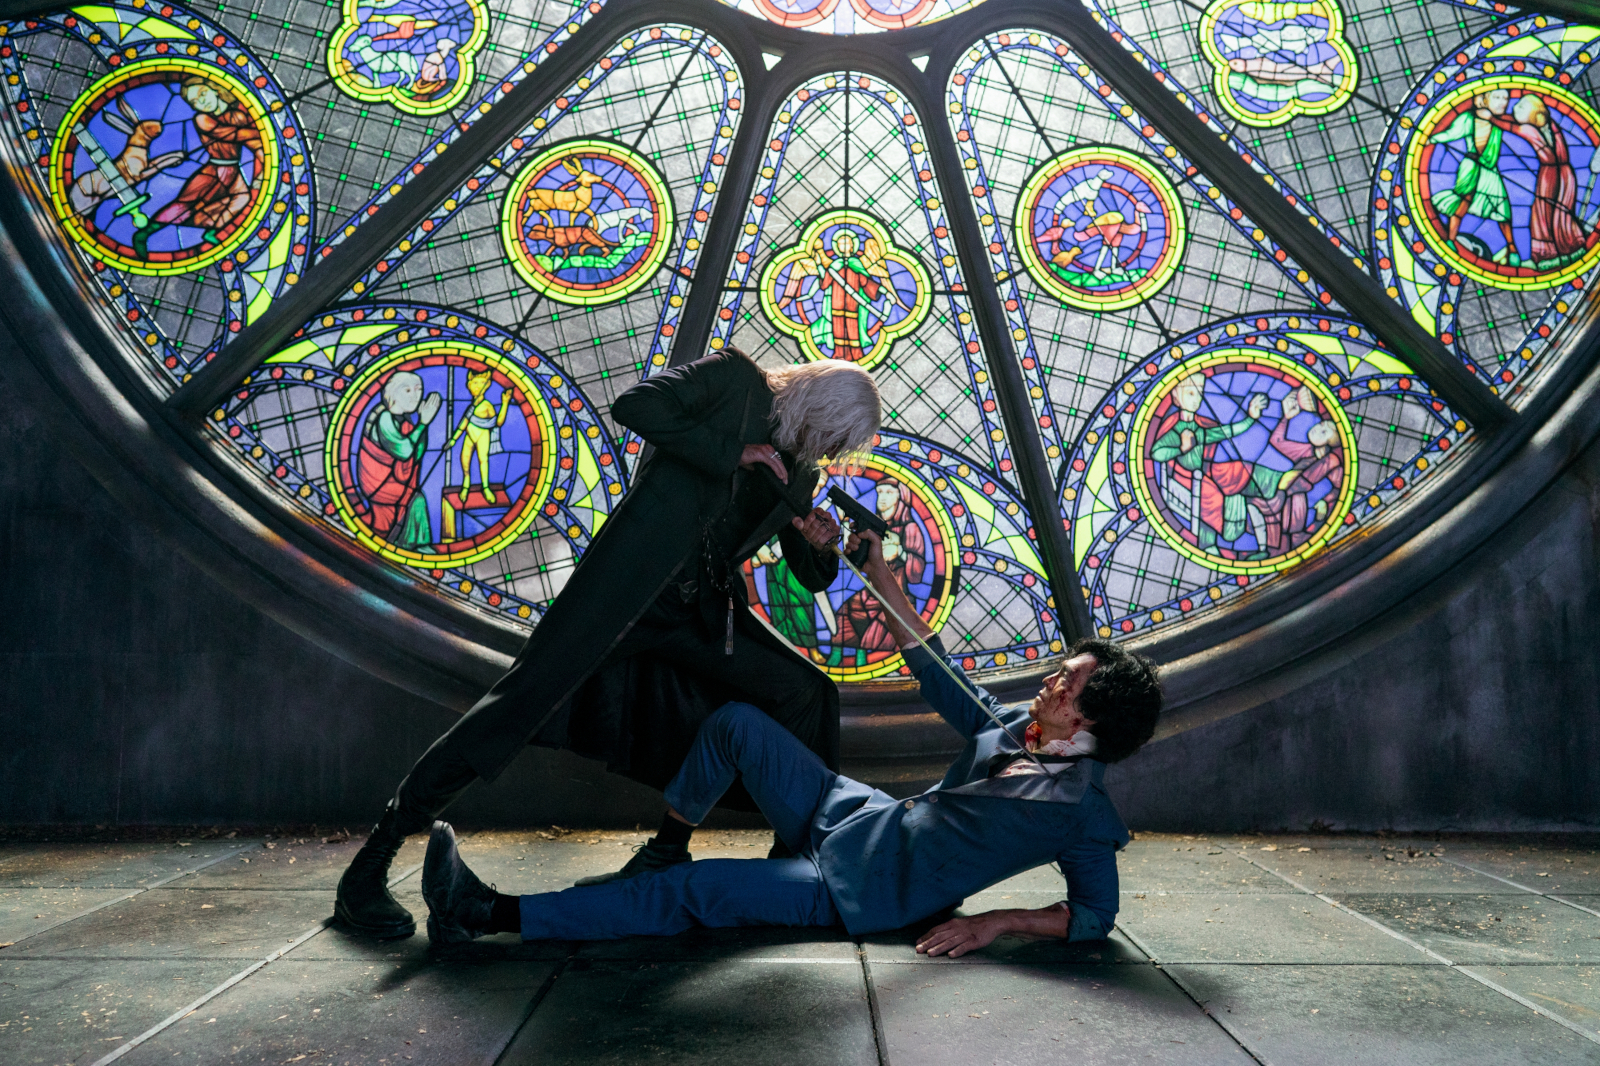 Vicious and Spike Spiegel fight in front of a stain-glass window in Netflix's live-action 'Cowboy Bebop' series, which is getting negative early reviews.